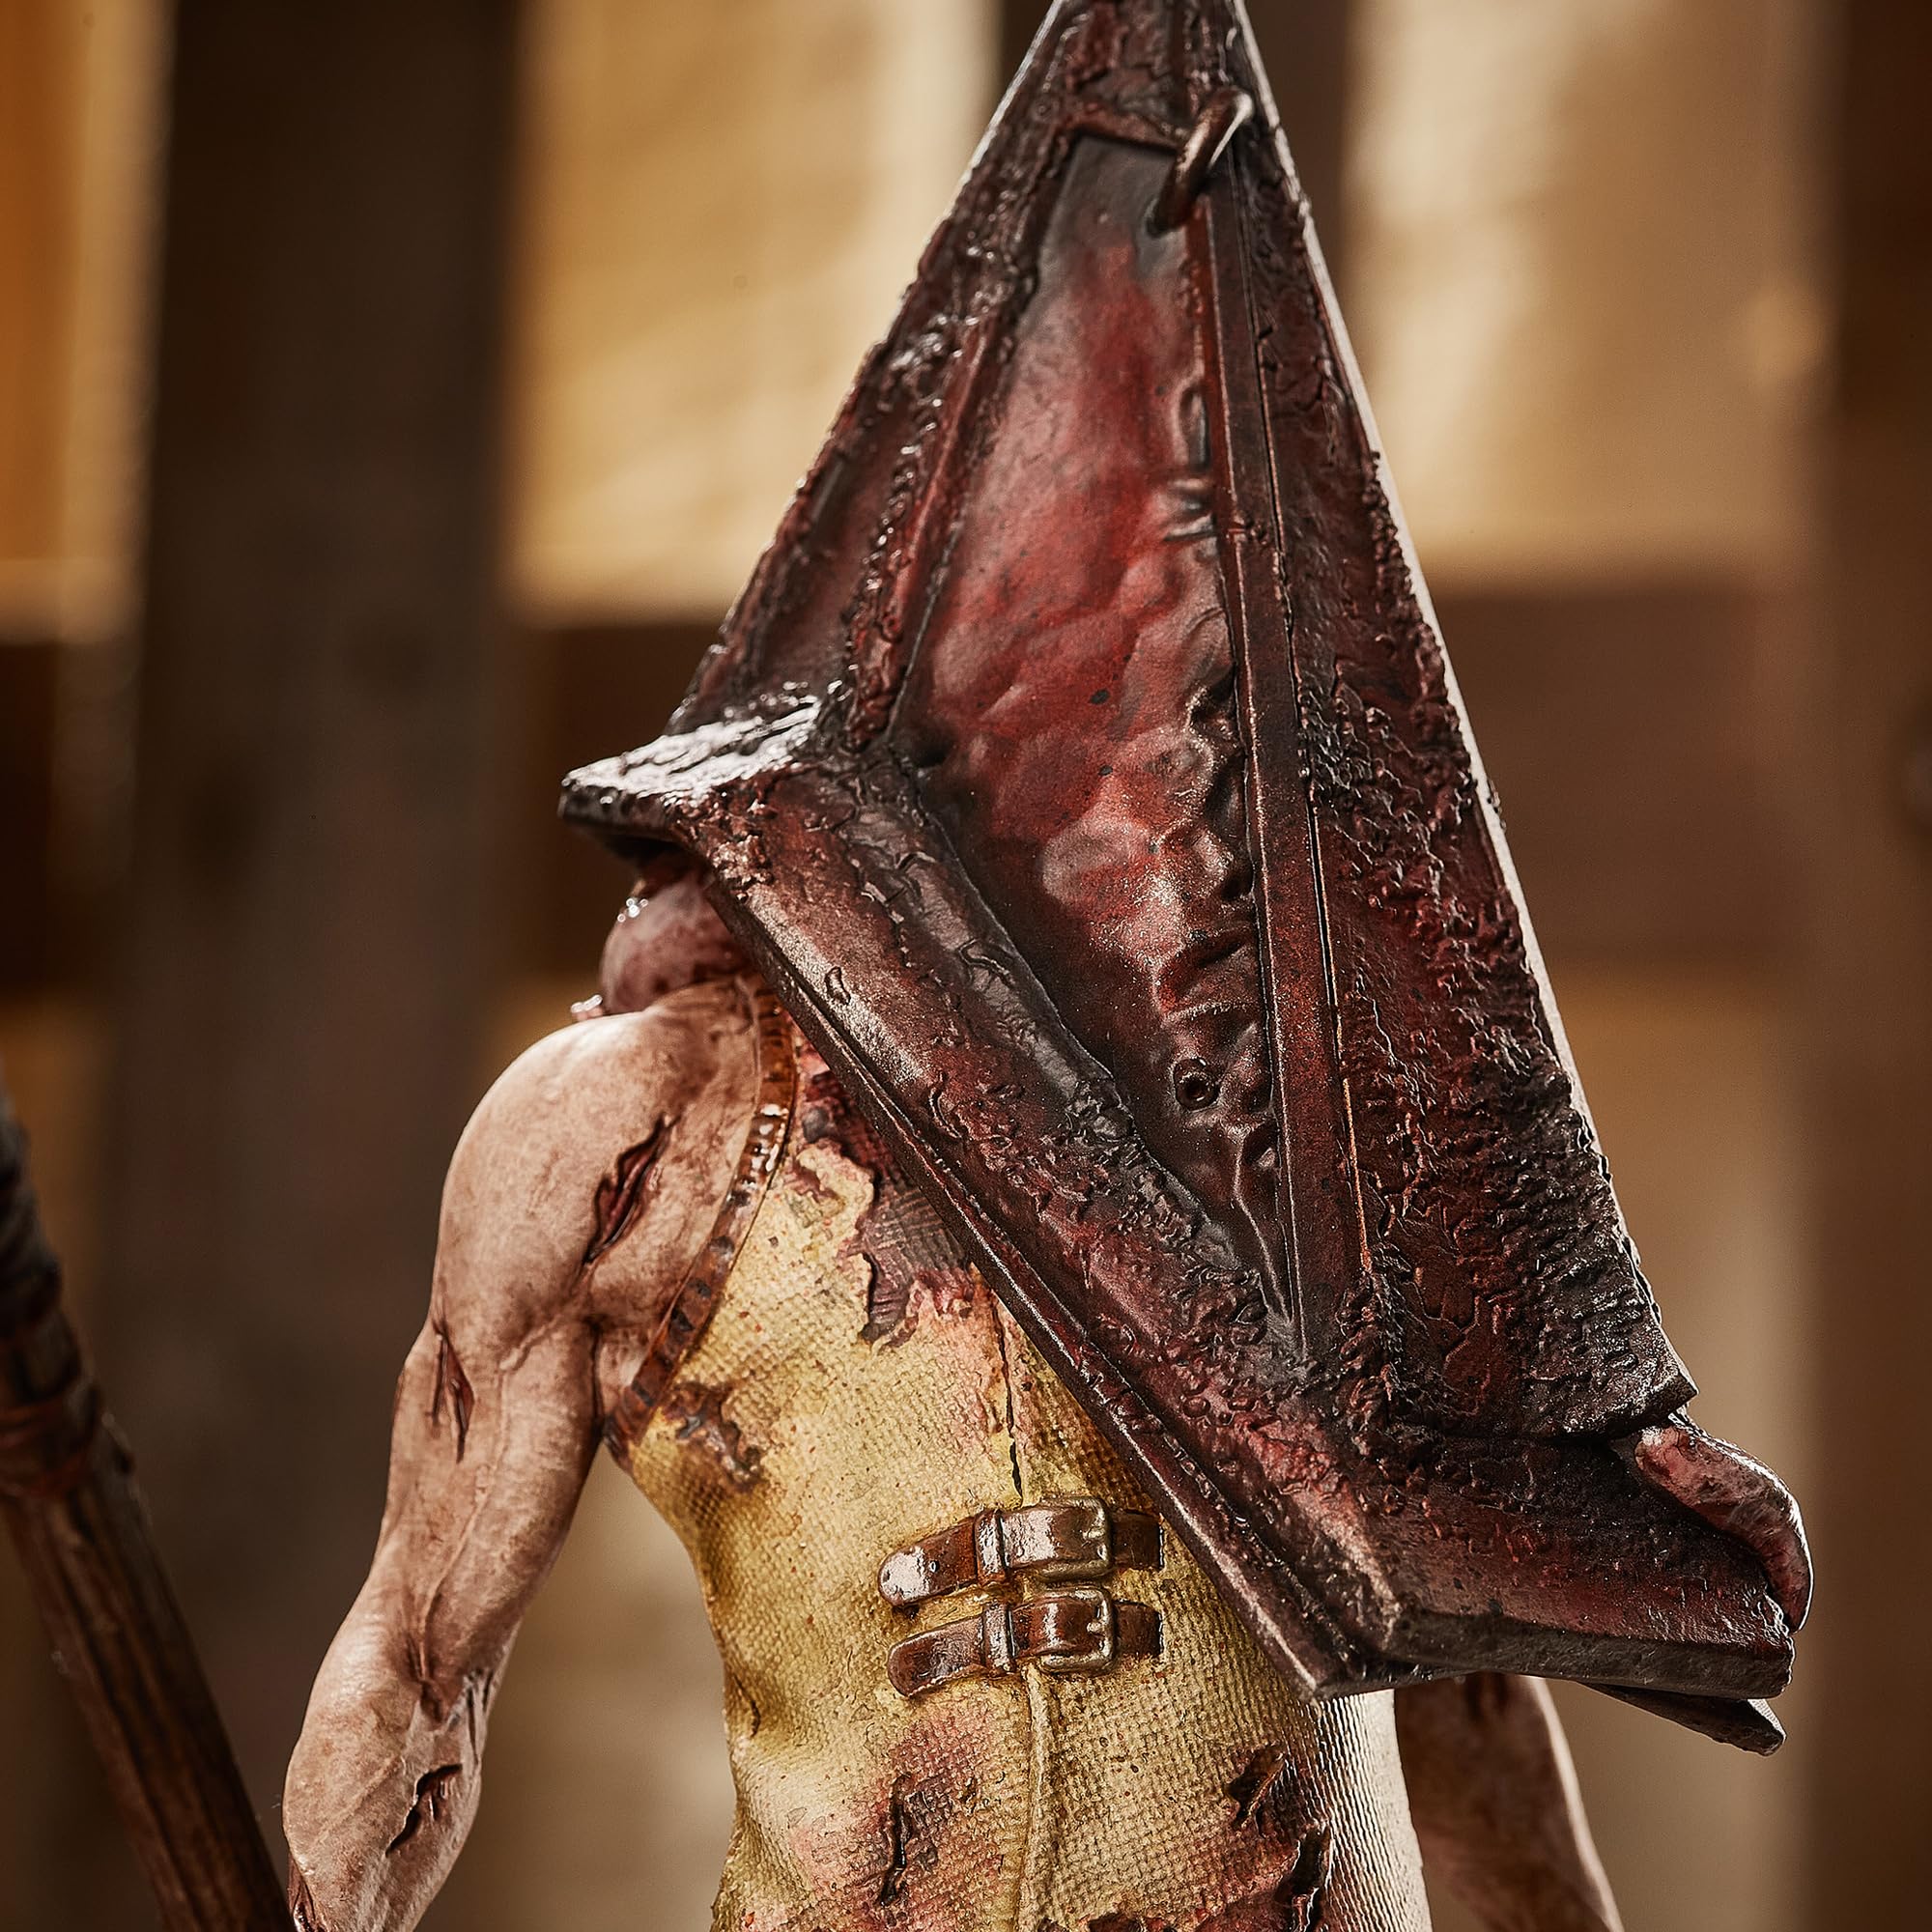 Numskull Silent Hill 2 Red Pyramid Thing Figure 11.6″ (29.5cm) Collectible Replica Statue - Official Silent Hill Merchandise - Limited Edition